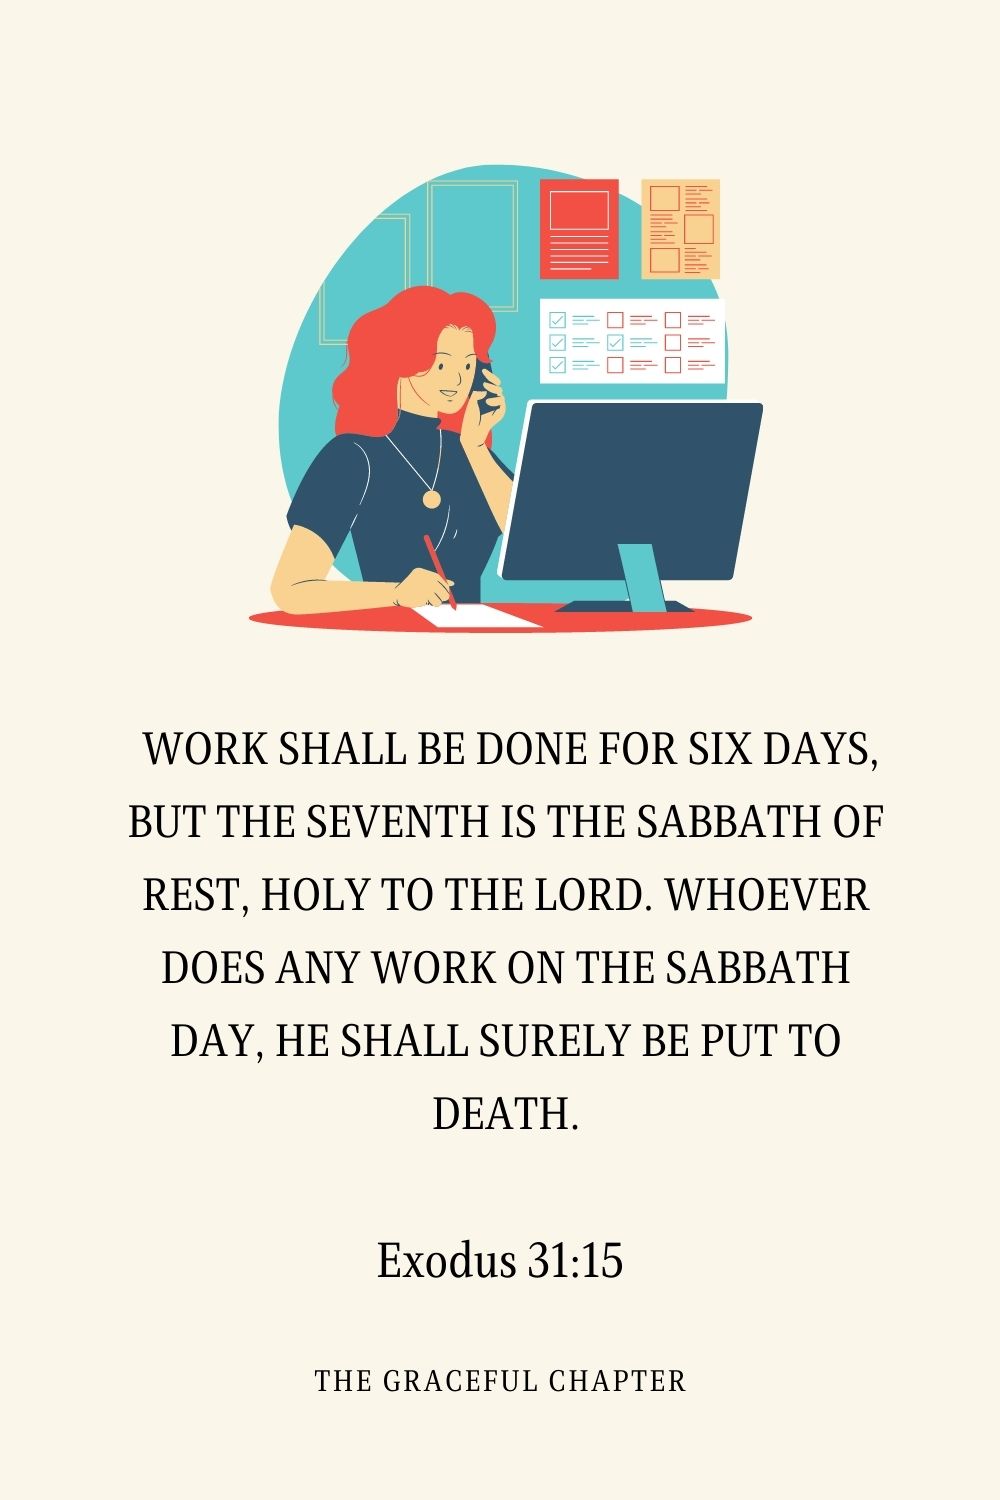  Work shall be done for six days, but the seventh is the Sabbath of rest, holy to the Lord. Whoever does any work on the Sabbath day, he shall surely be put to death.